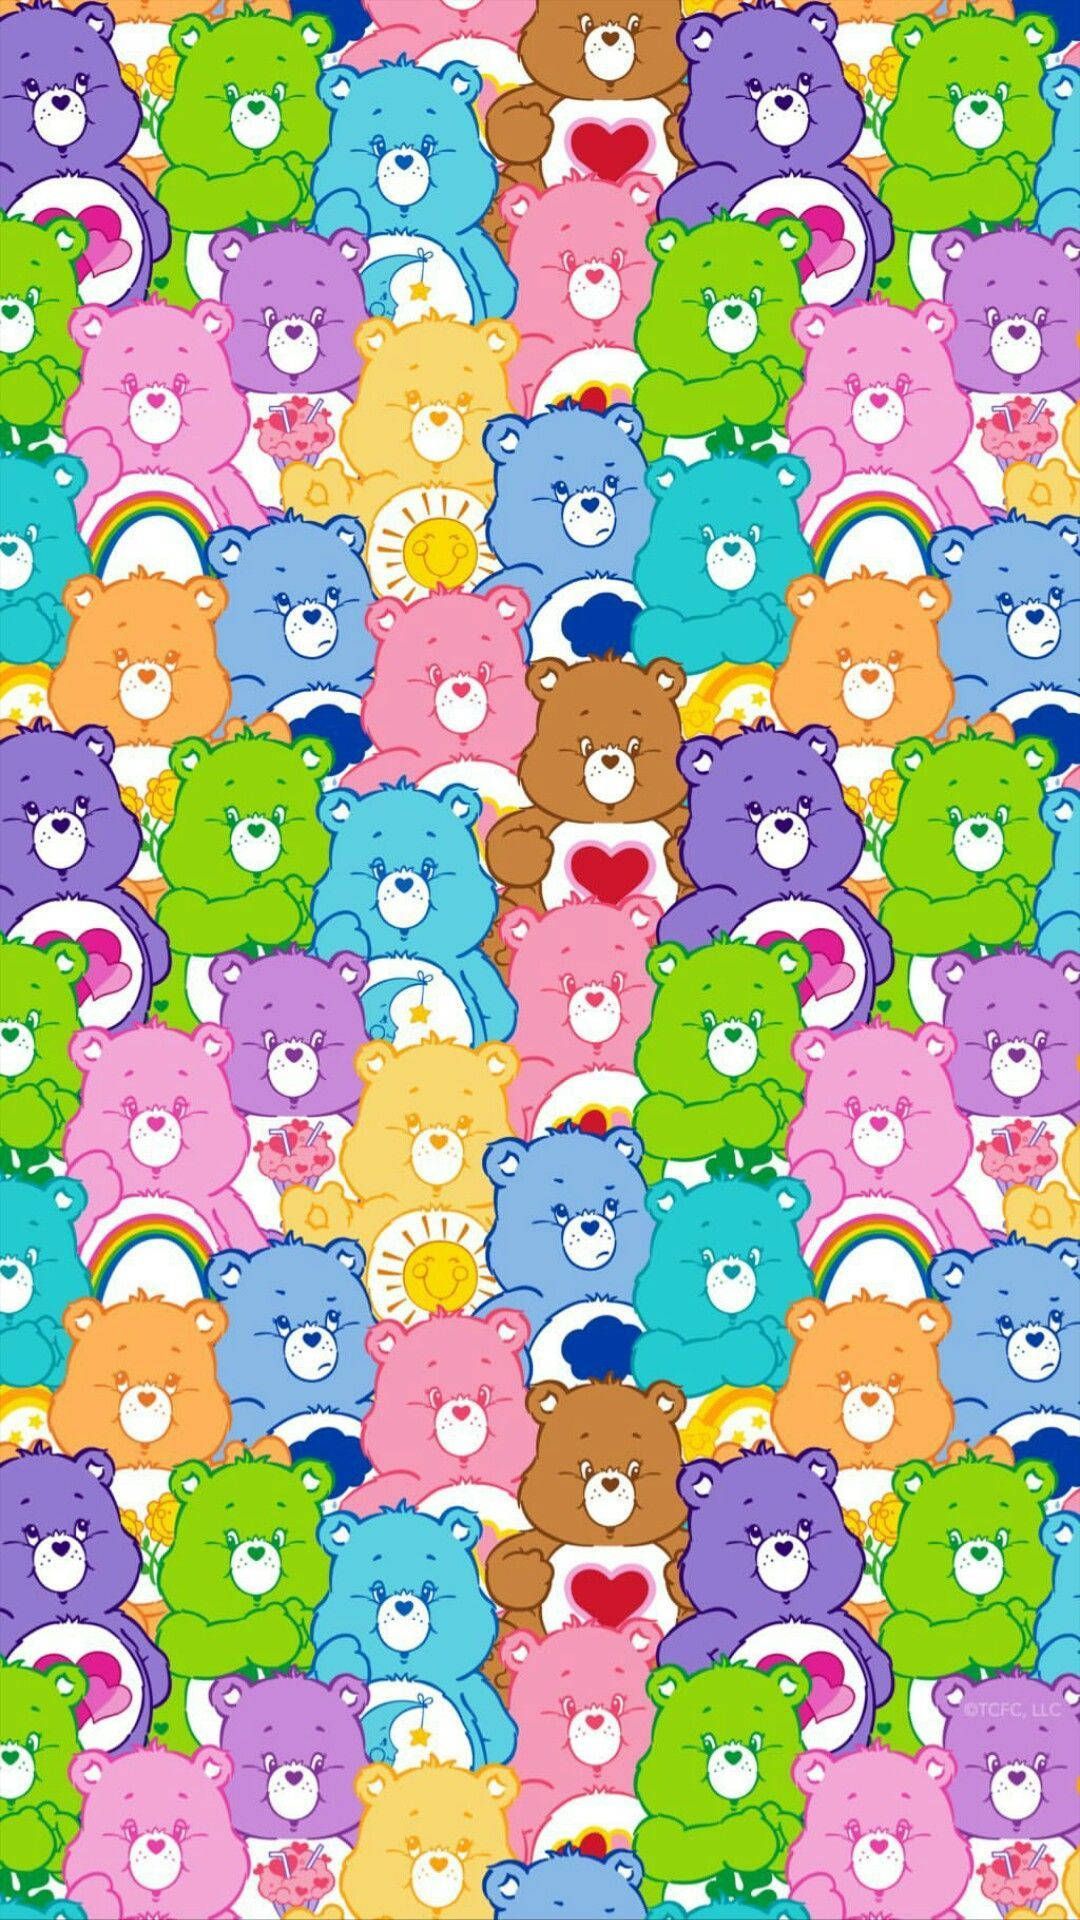 Care Bears Wallpaper for iPhone with high-resolution 1080x1920 pixel. You can use this wallpaper for your iPhone 5, 6, 7, 8, X, XS, XR backgrounds, Mobile Screensaver, or iPad Lock Screen - Kidcore